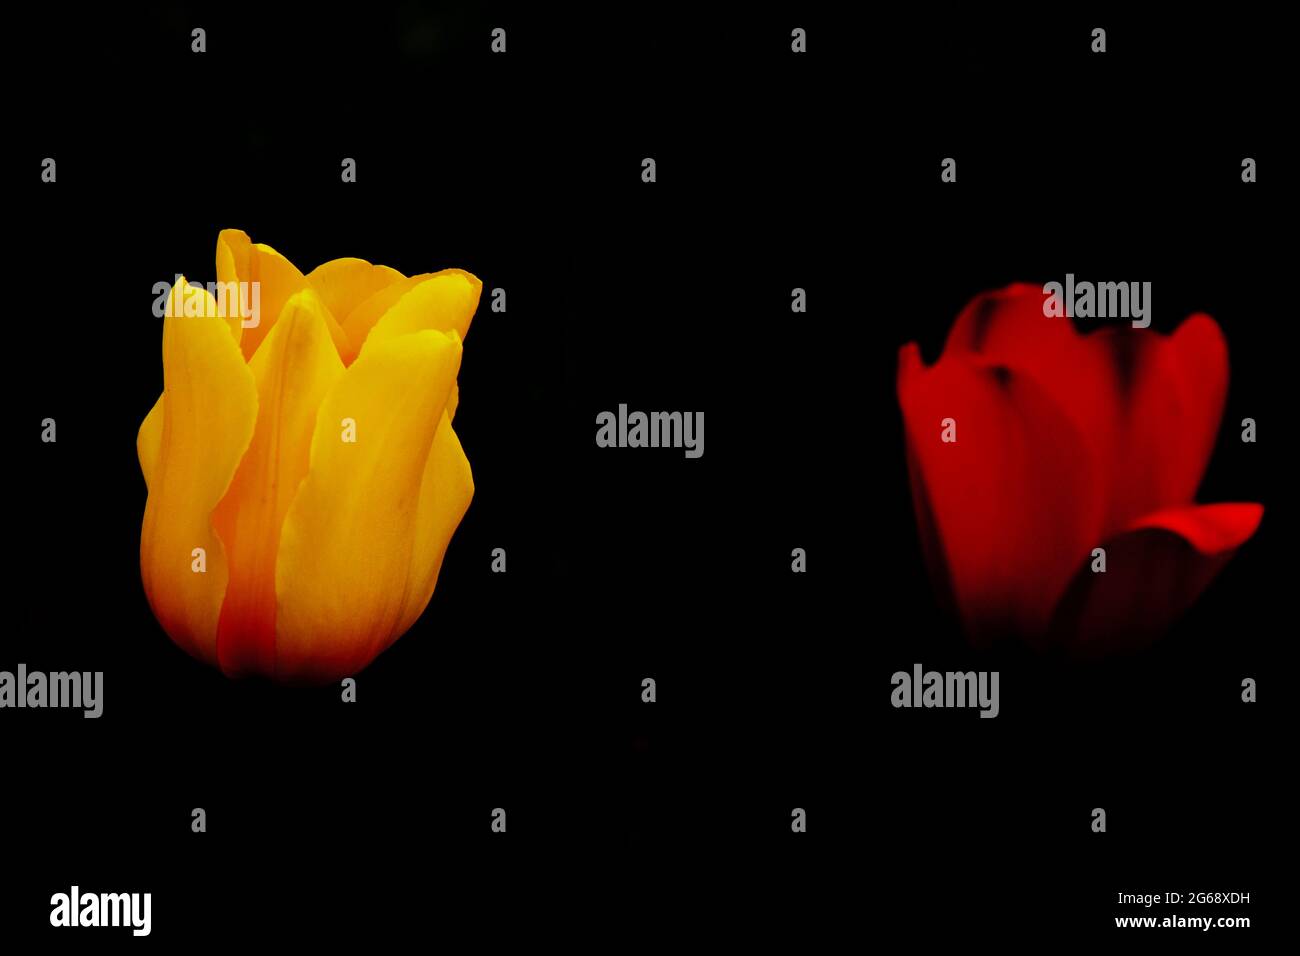 Yellow and Red Tulips on black background Stock Photo